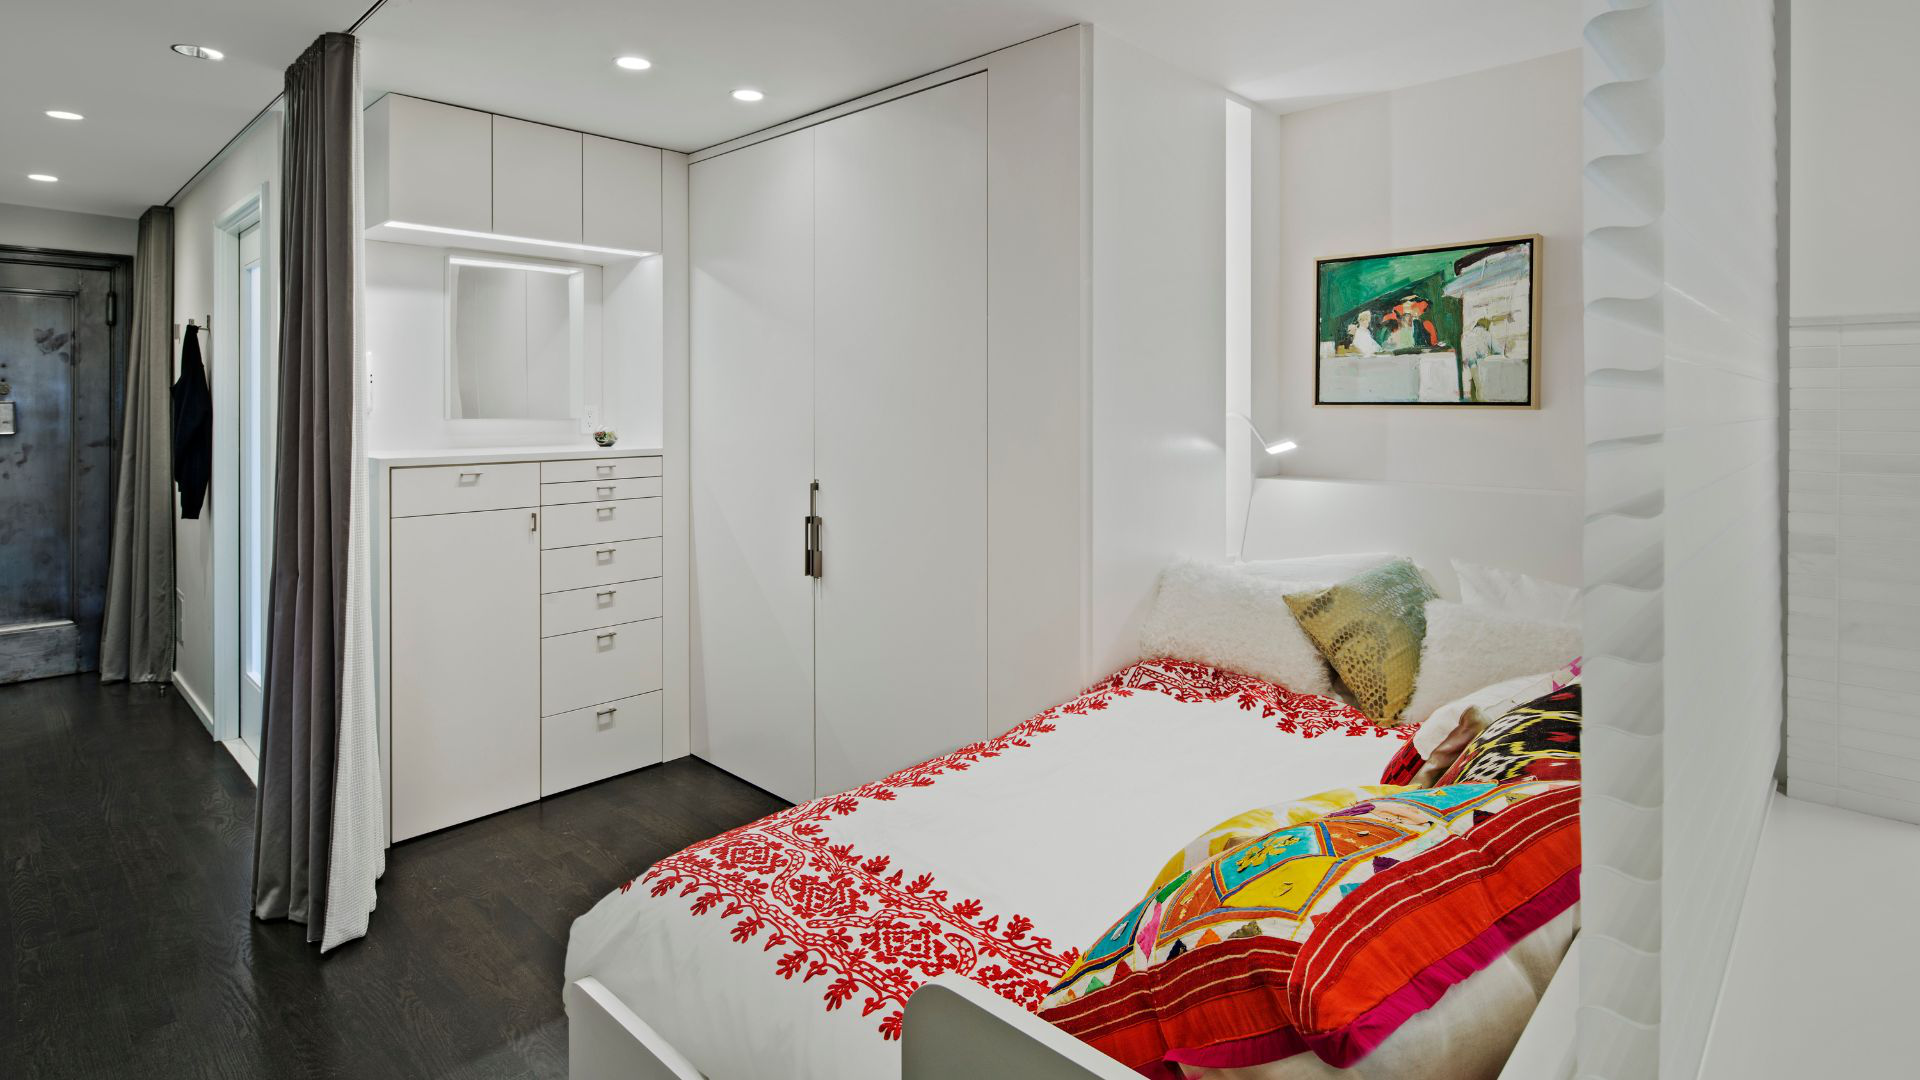 A cozy, curtained sleeping alcove white with red accents on the bedding. A small painting and light slot personalize the space. A built-in dresser and a wide closet are on the far side.